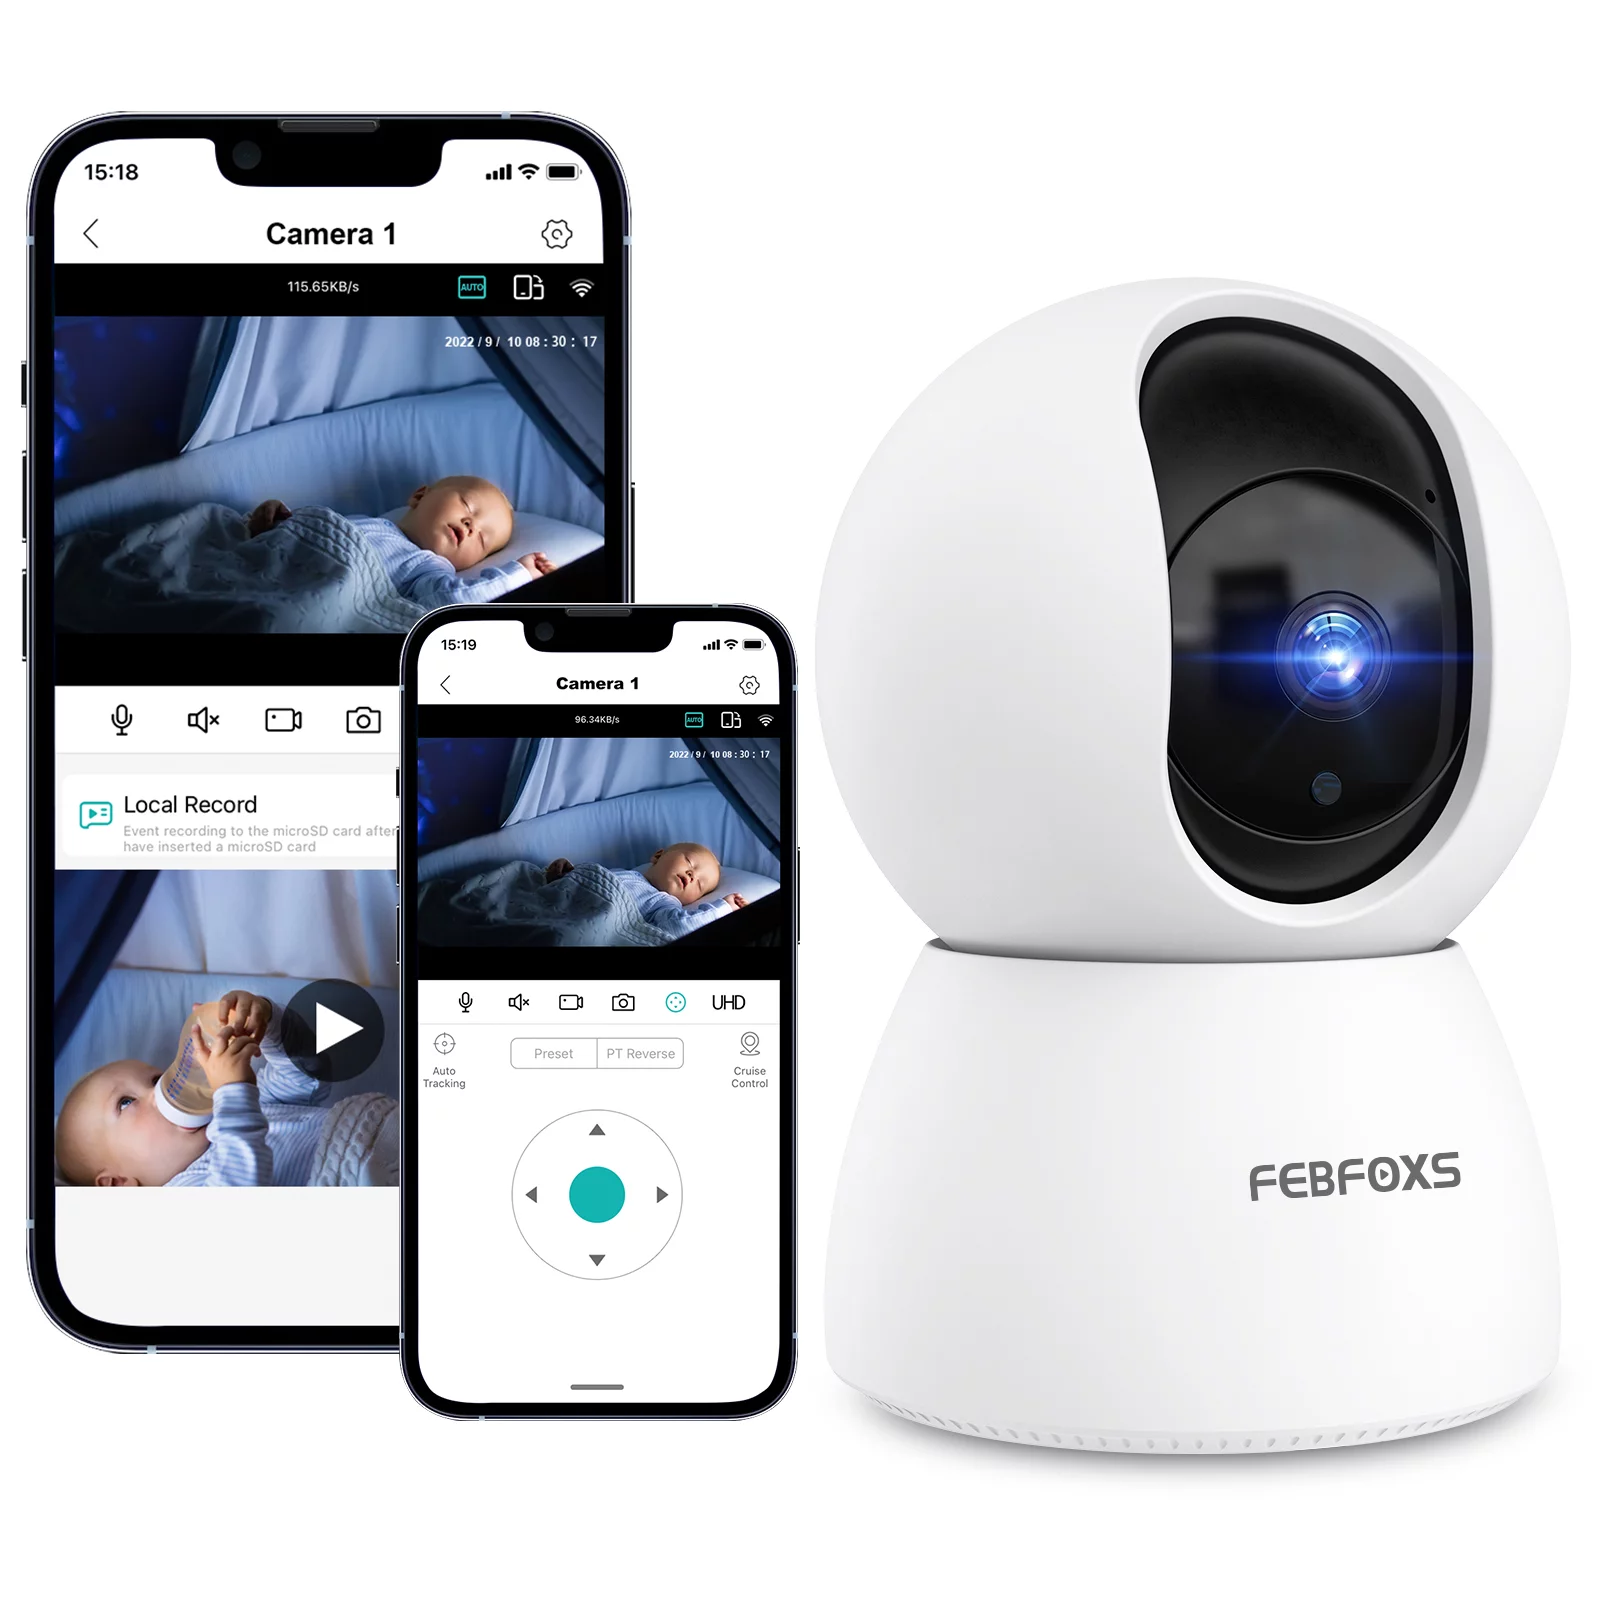 Febfoxs Baby Monitor Security Camera, WiFi Indoor Camera, 360-Degree Smart 1080P Pet Camera for Home Security and Nanny Elderlywith Motion Detection, Night Vision, Two-Way Audio